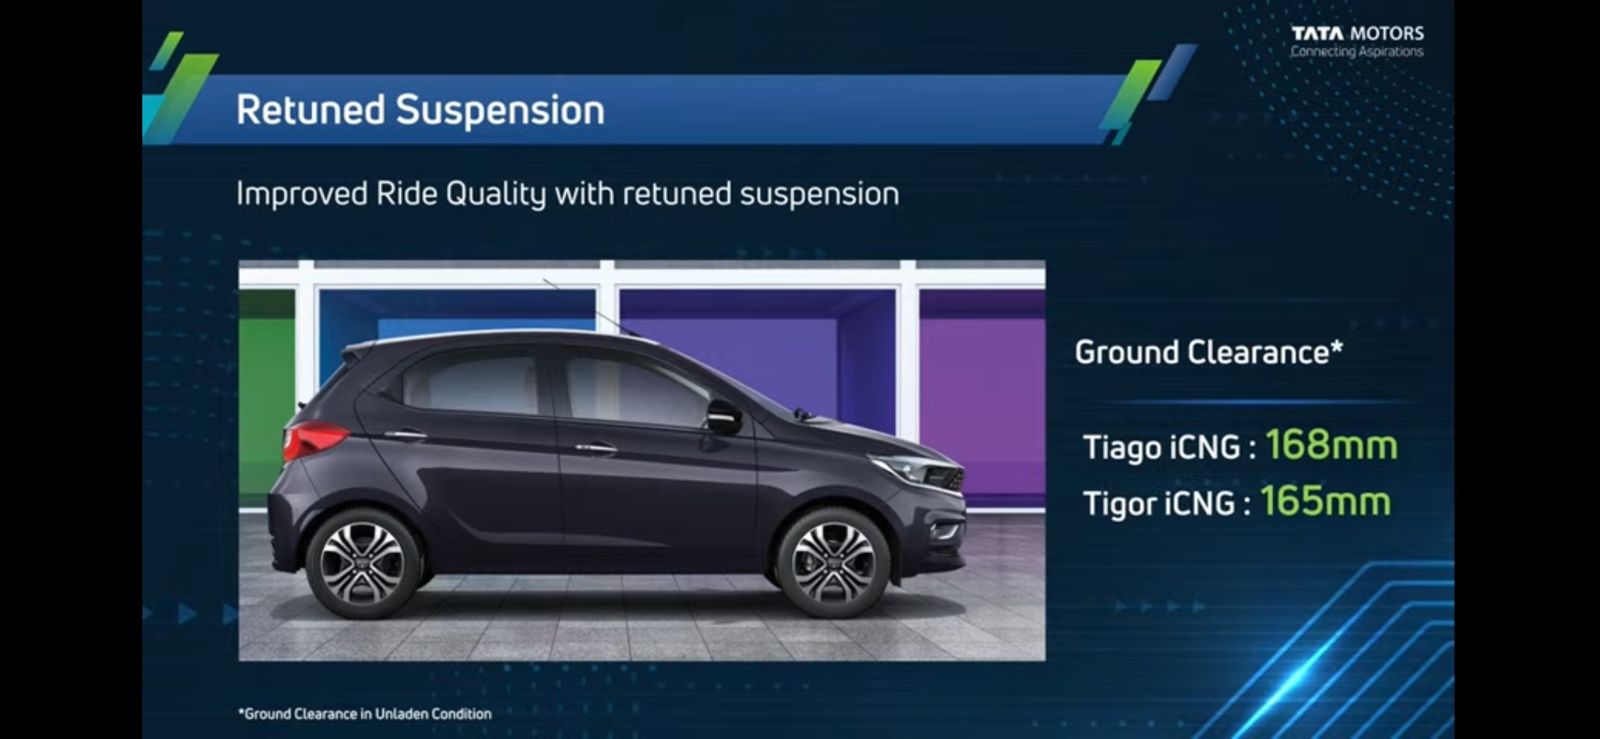 <p>With retuned suspensions both cars have very good ground clearence</p>